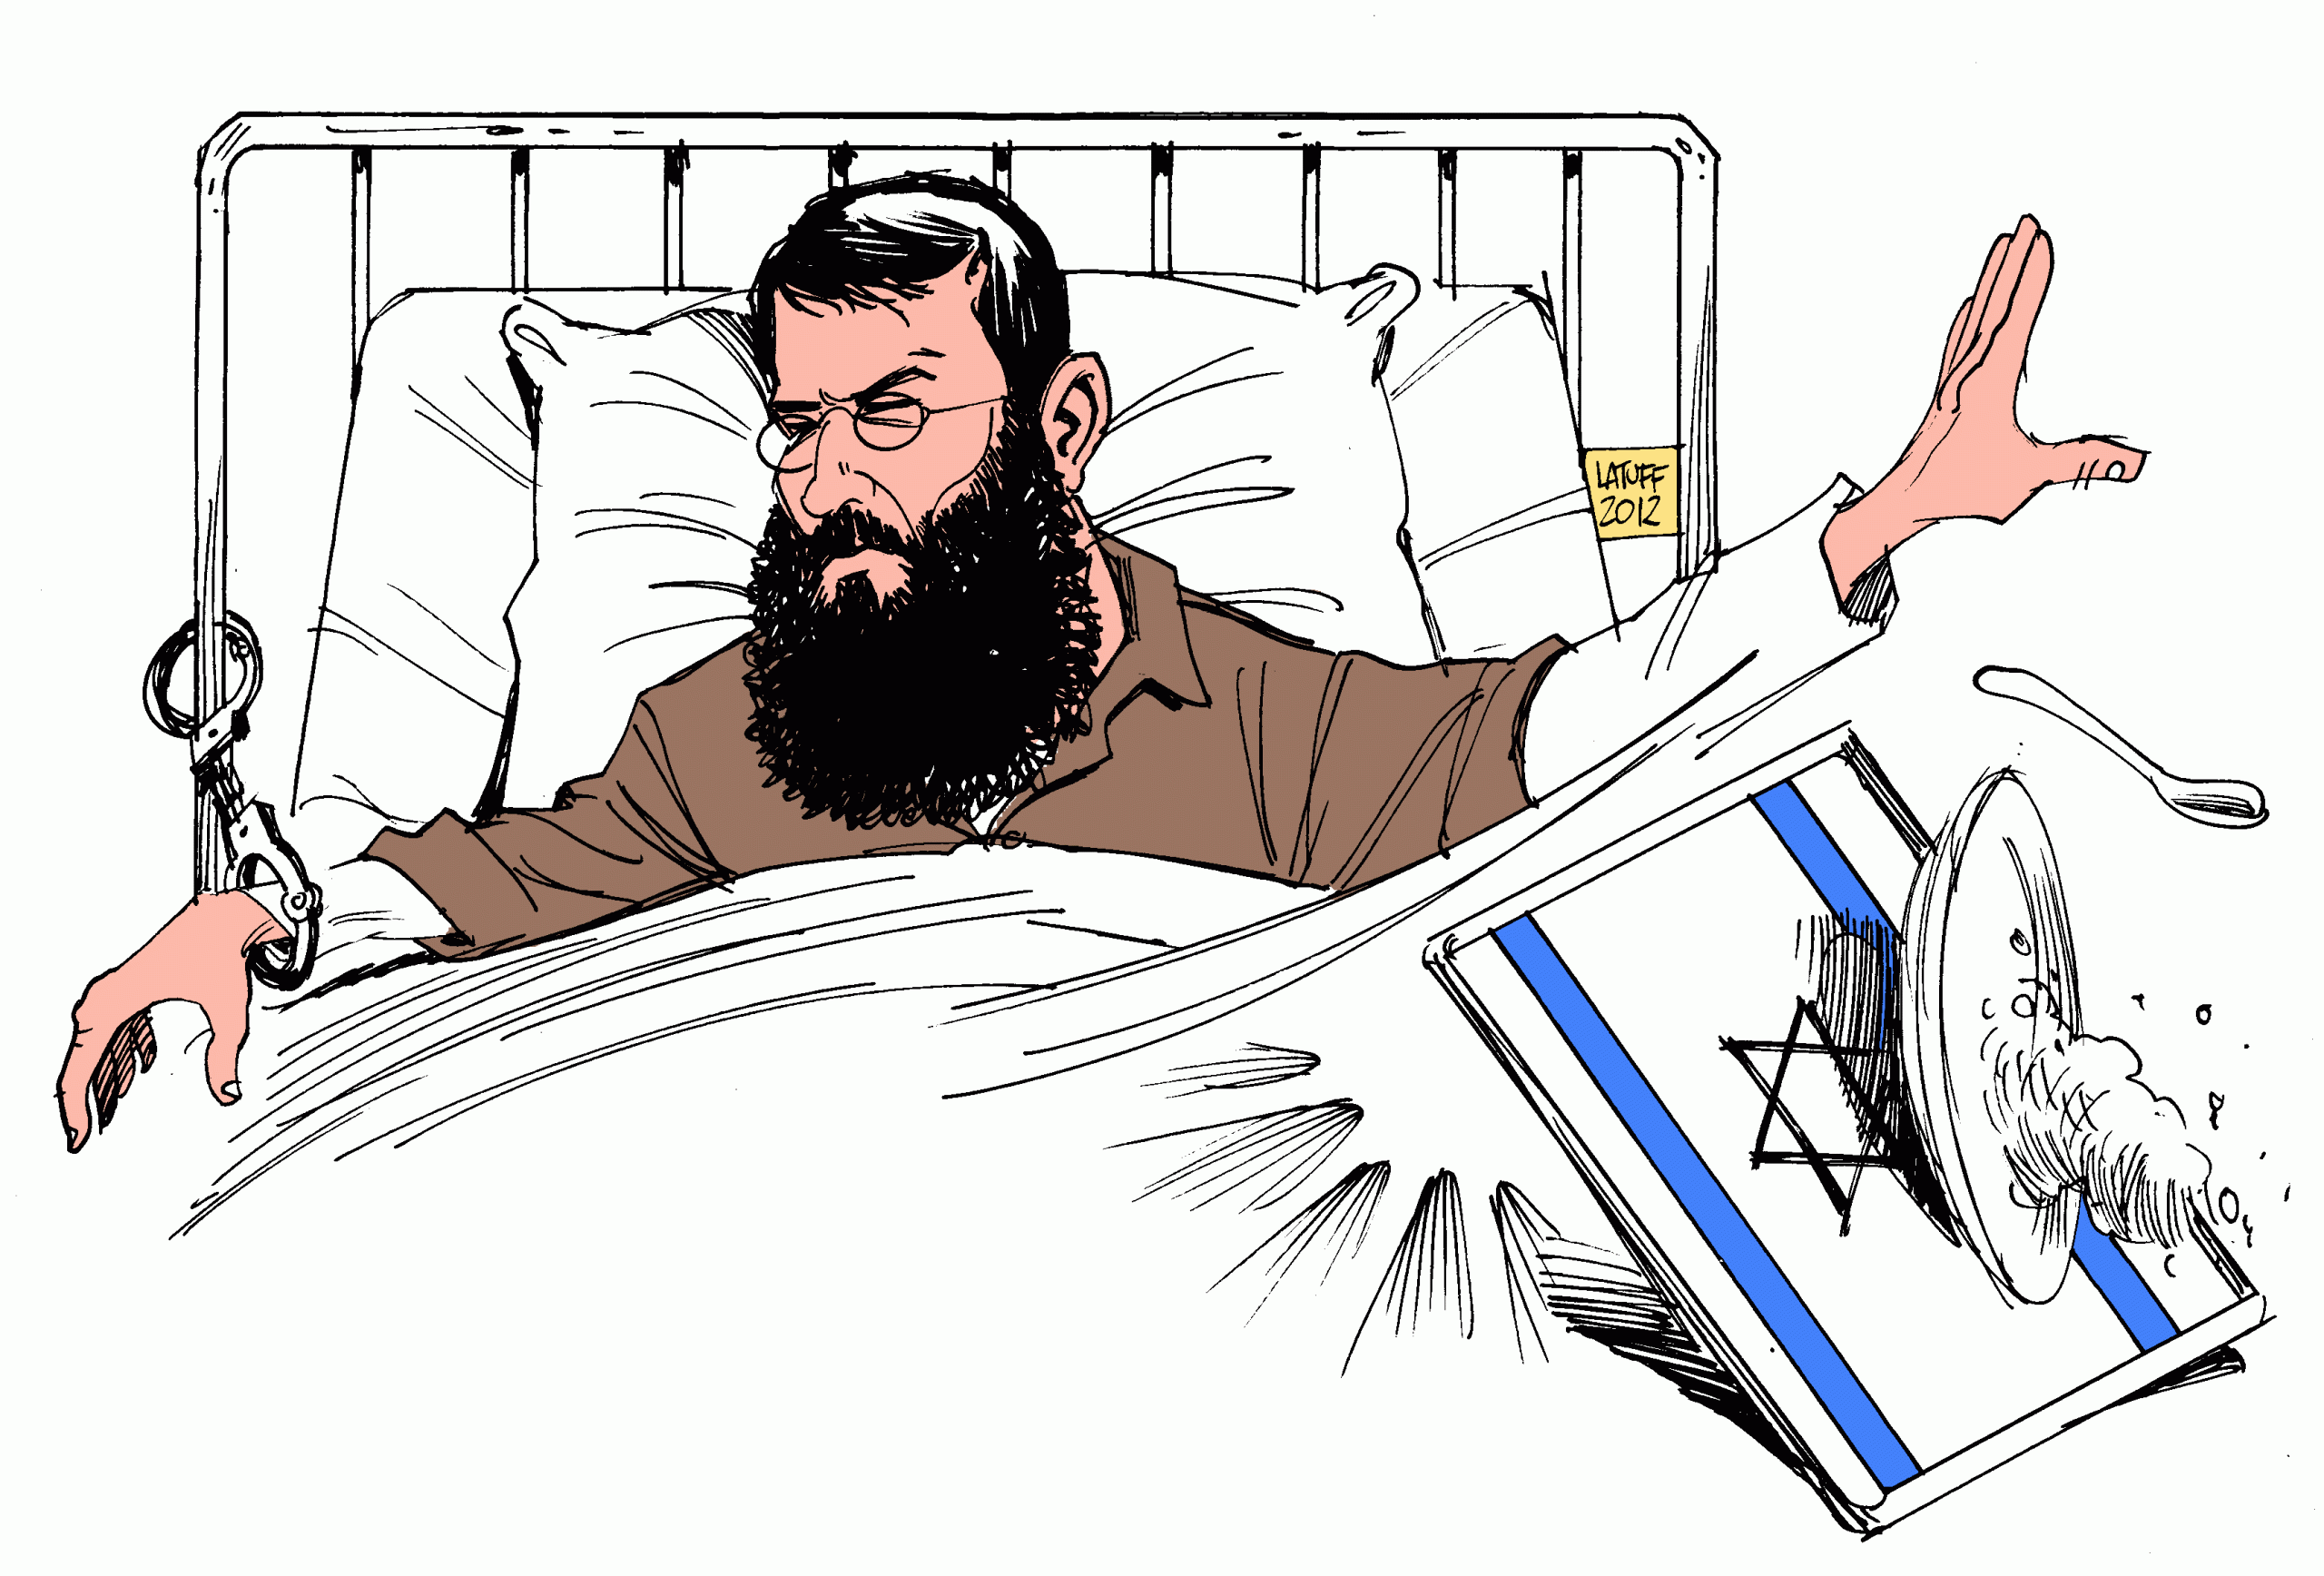 Palestinian prisoner Khader Adnan entered on Wednesday, March 29, 2023, his 53rd day of hunger strike in Israeli prisons to protest his administrative detention.